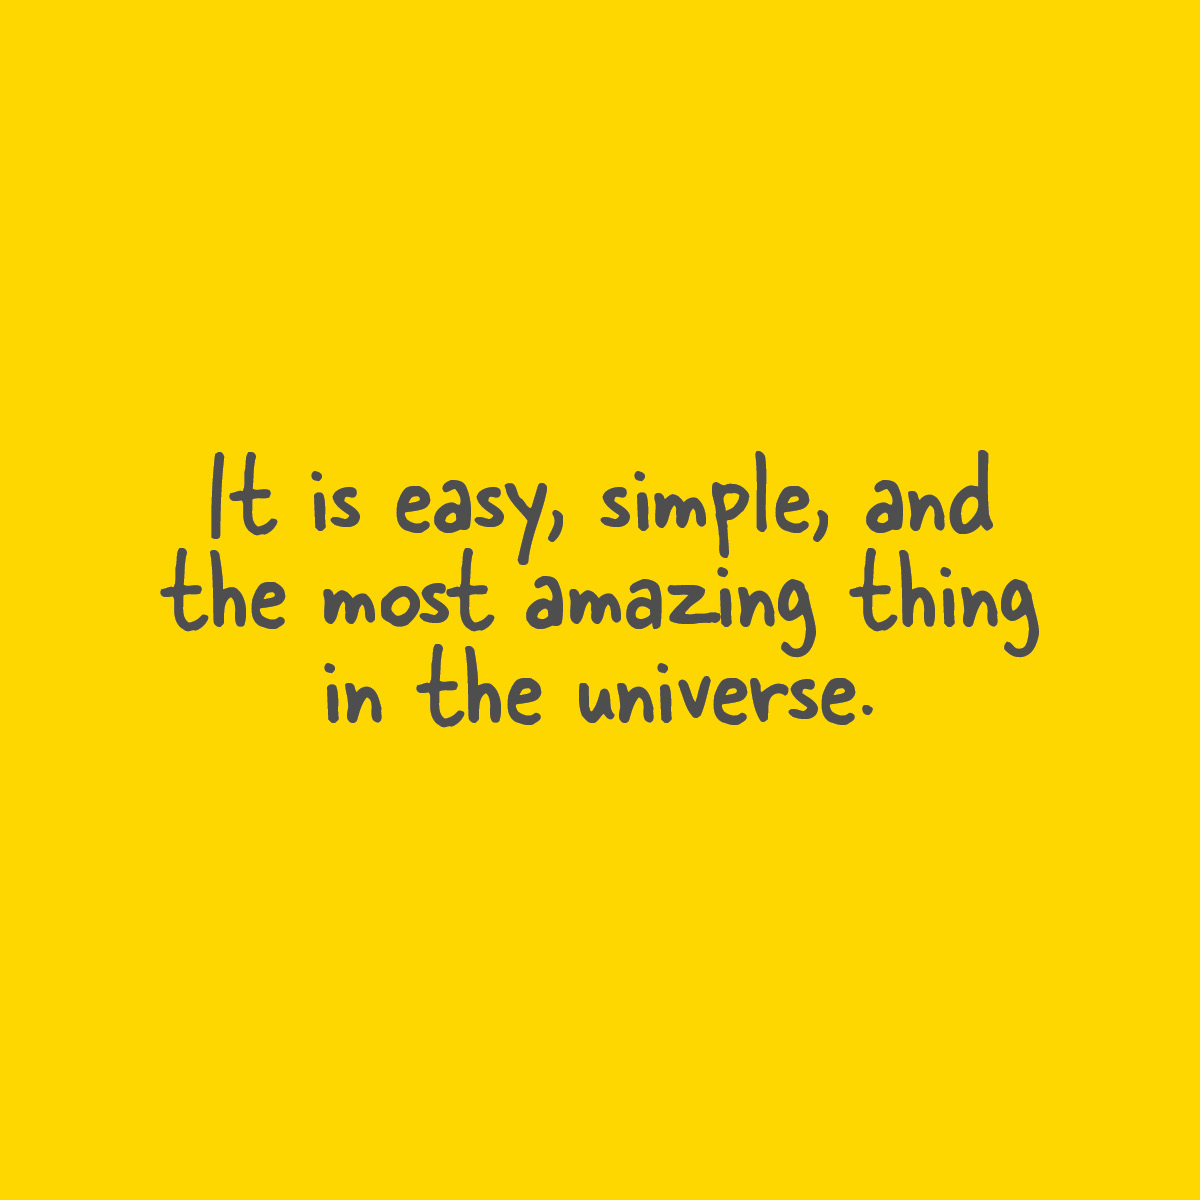 It is easy, simple, and the most amazing thing in the universe.